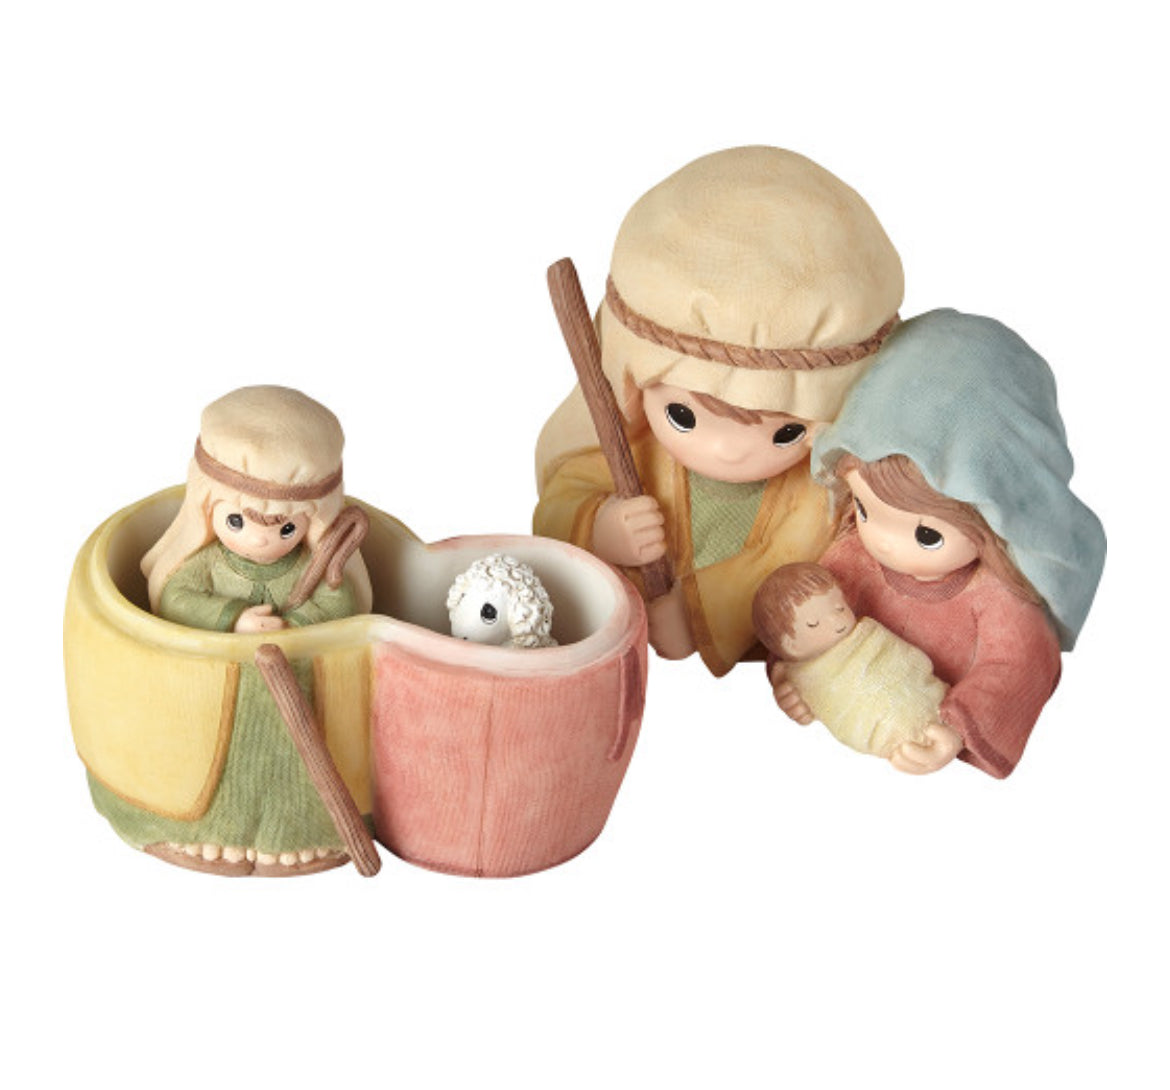 Celebrate The Miracle At The Heart Of Christmas Nesting Nativity Set
- Precious Moment Figurine